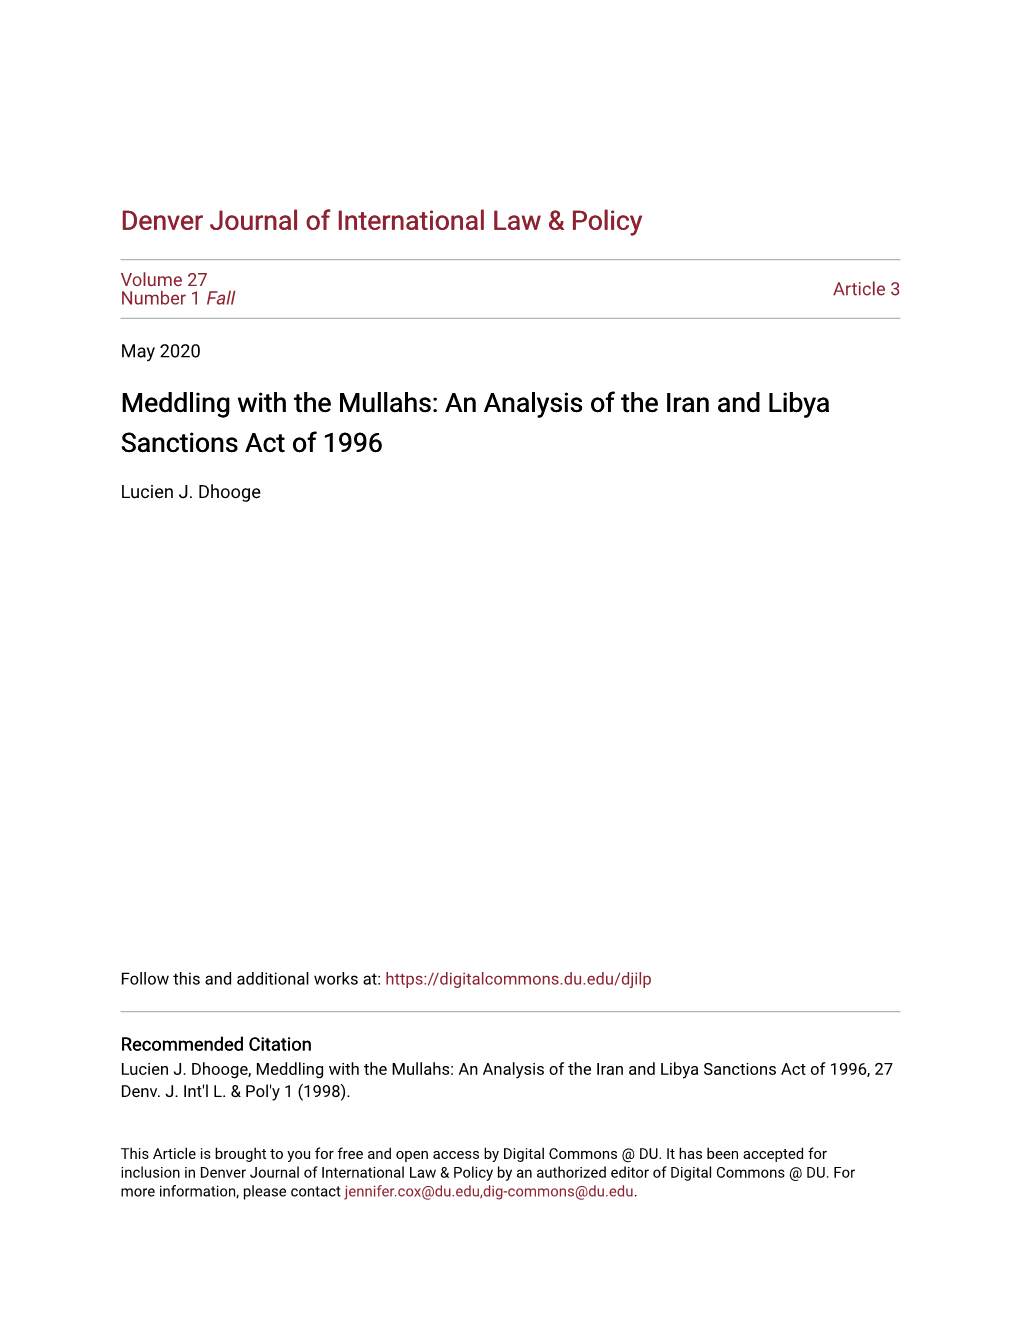 An Analysis of the Iran and Libya Sanctions Act of 1996